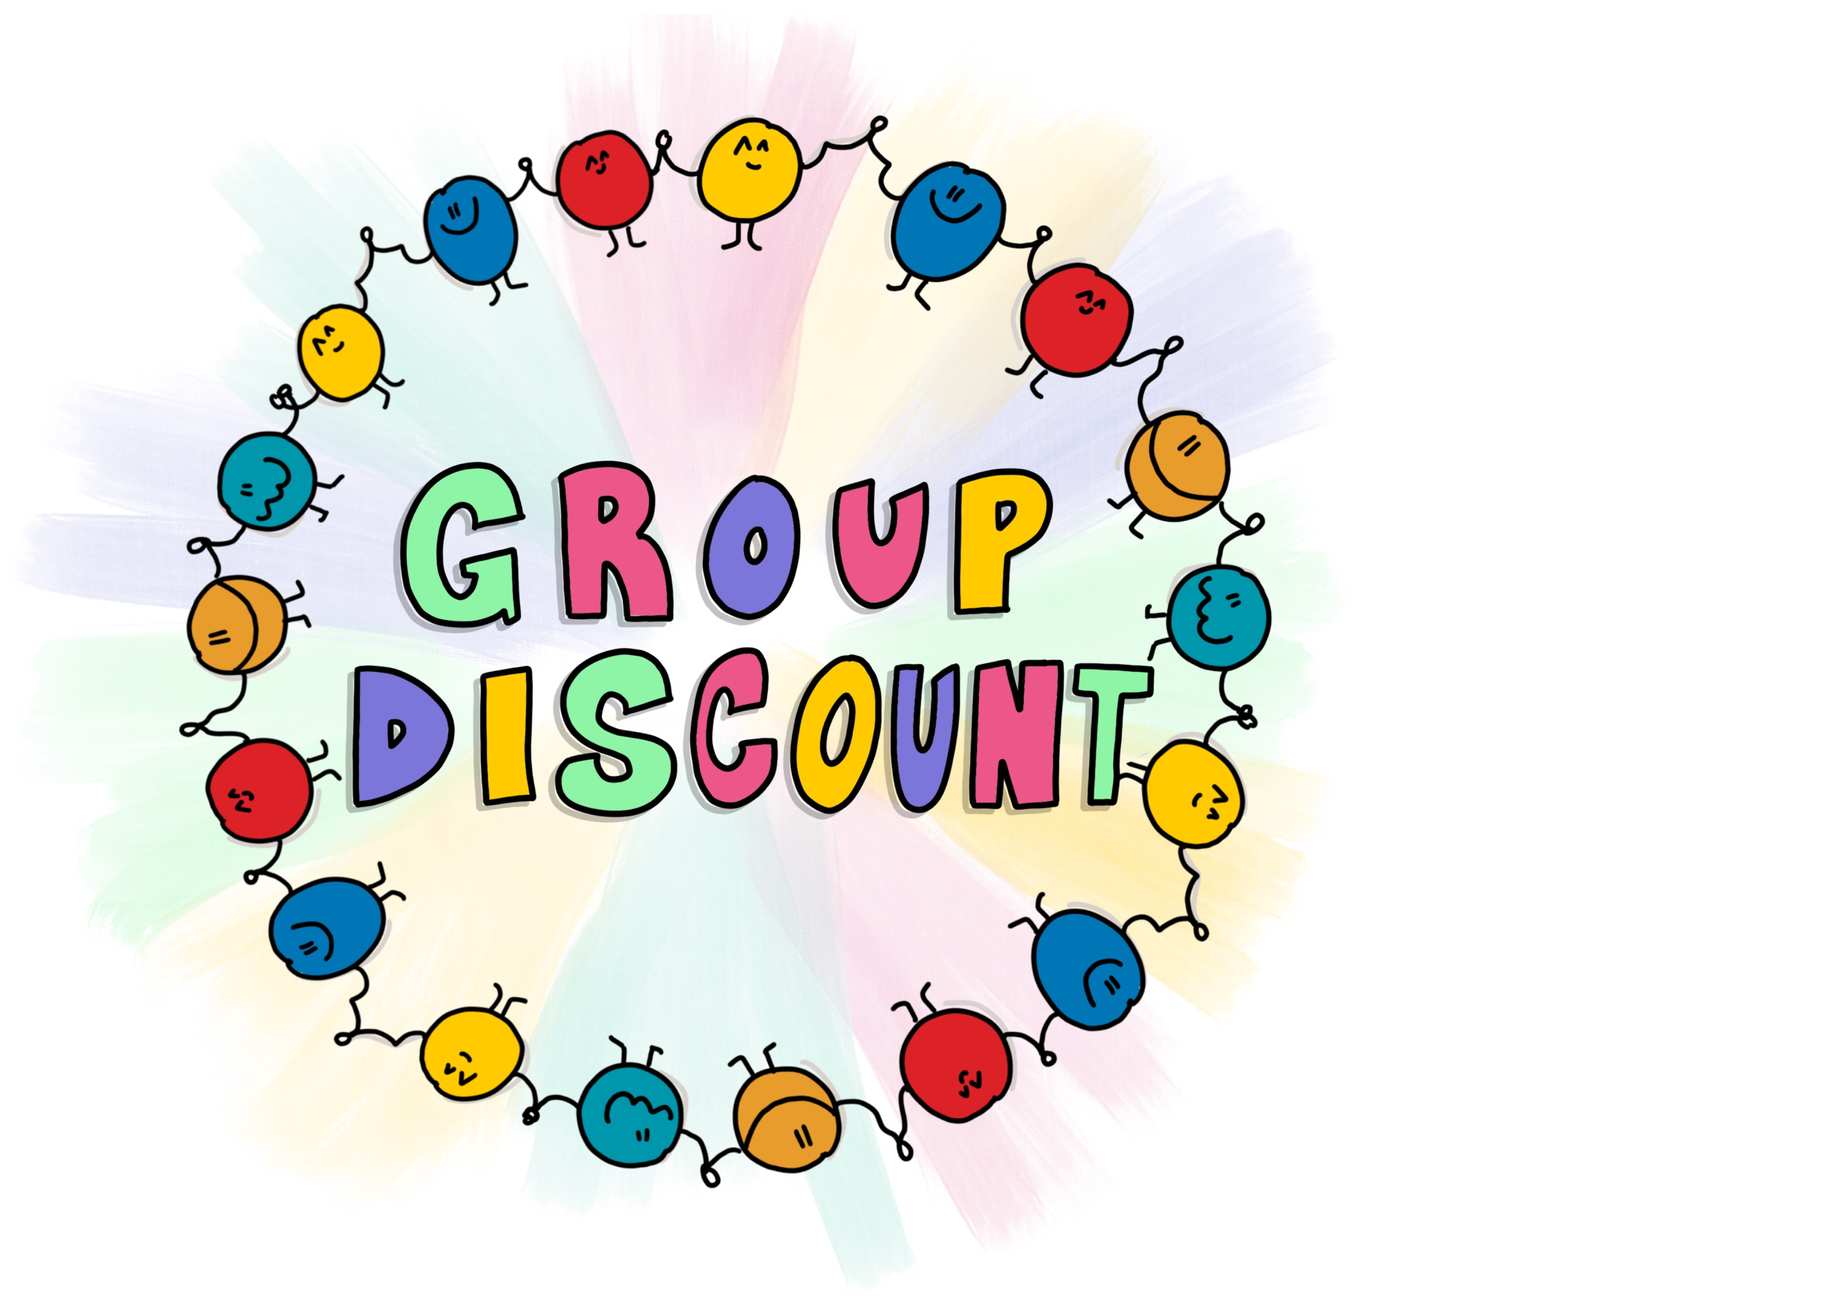 groupdiscount group circle